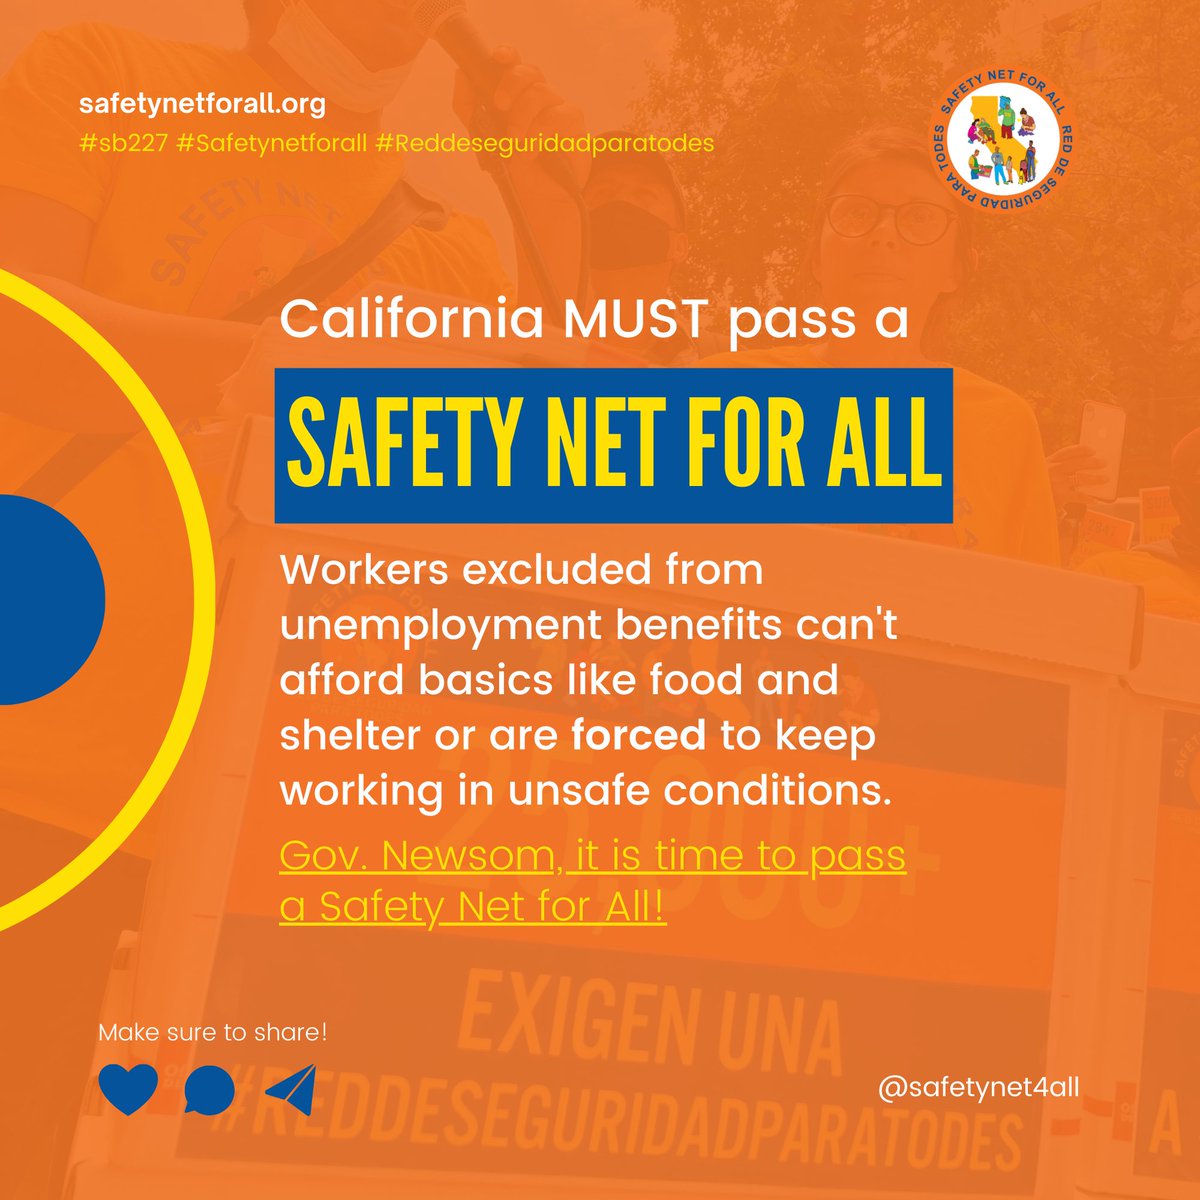 Workers excluded from unemployment benefits are either denied access to basics like food/shelter or forced to keep working in unsafe conditions. Protect our most vulnerable and essential workers! #SB227 #SafetyNetforAll